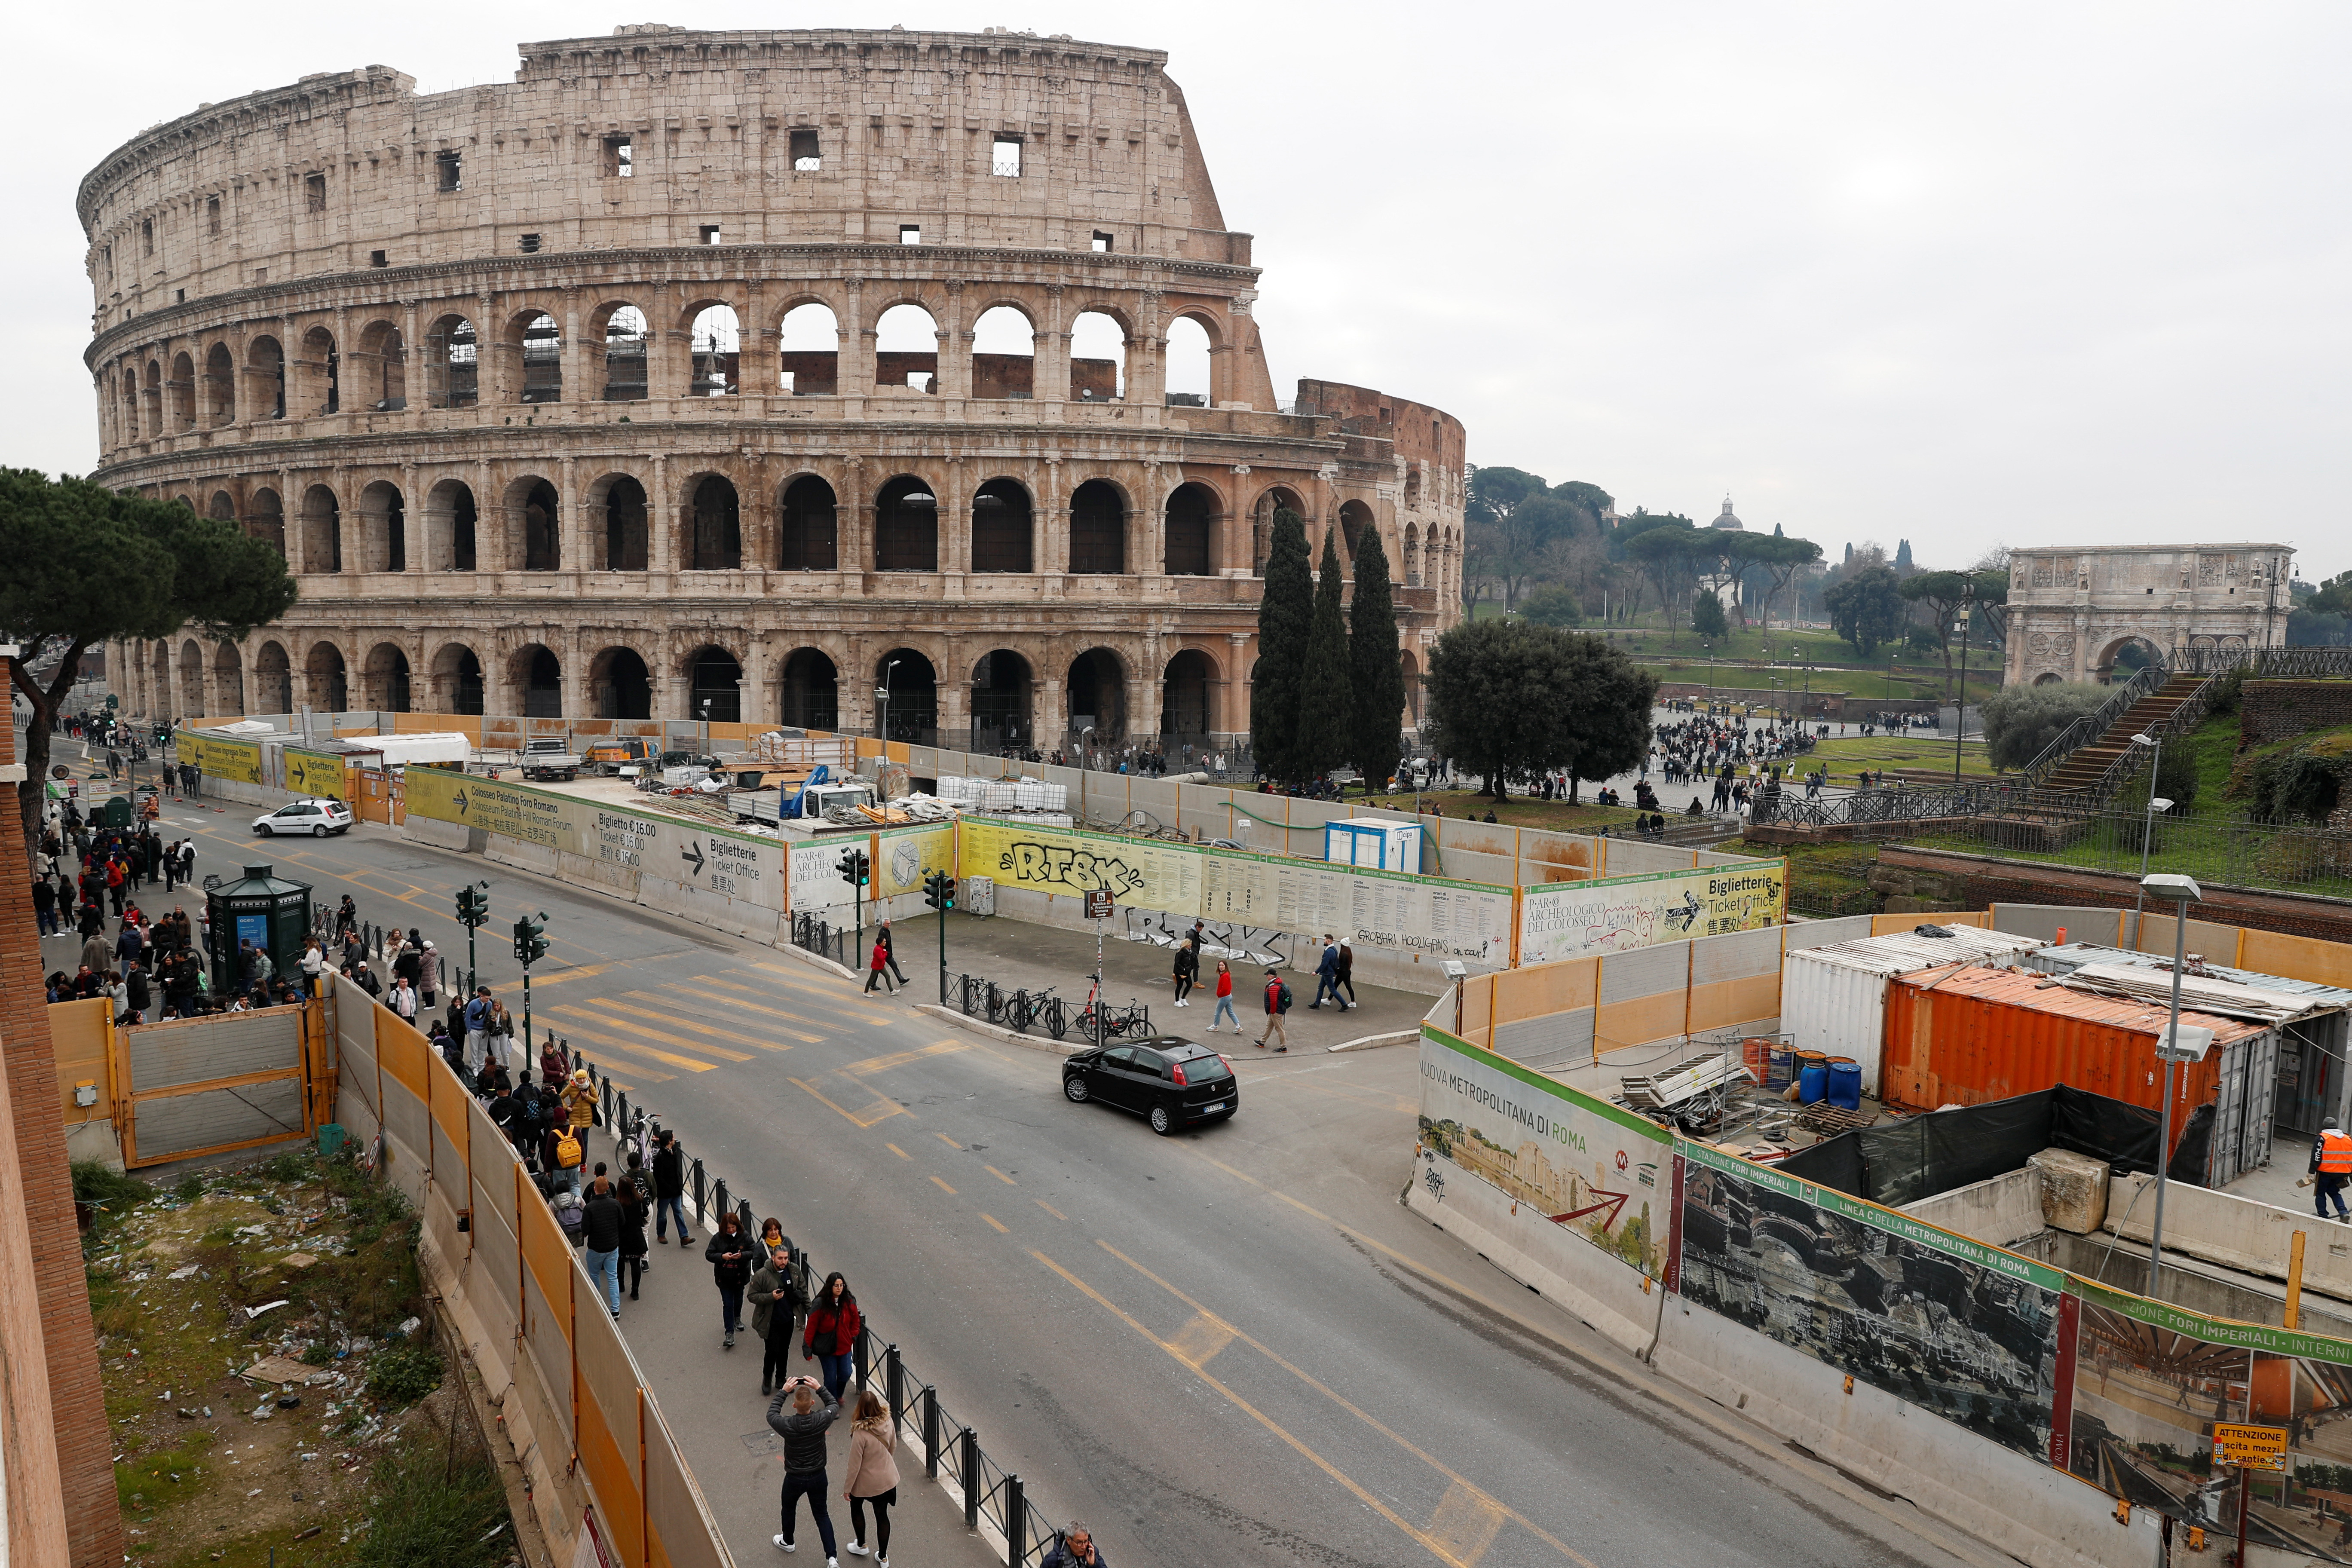 General view of the Colosseum next to a subway's construction sites in Rome